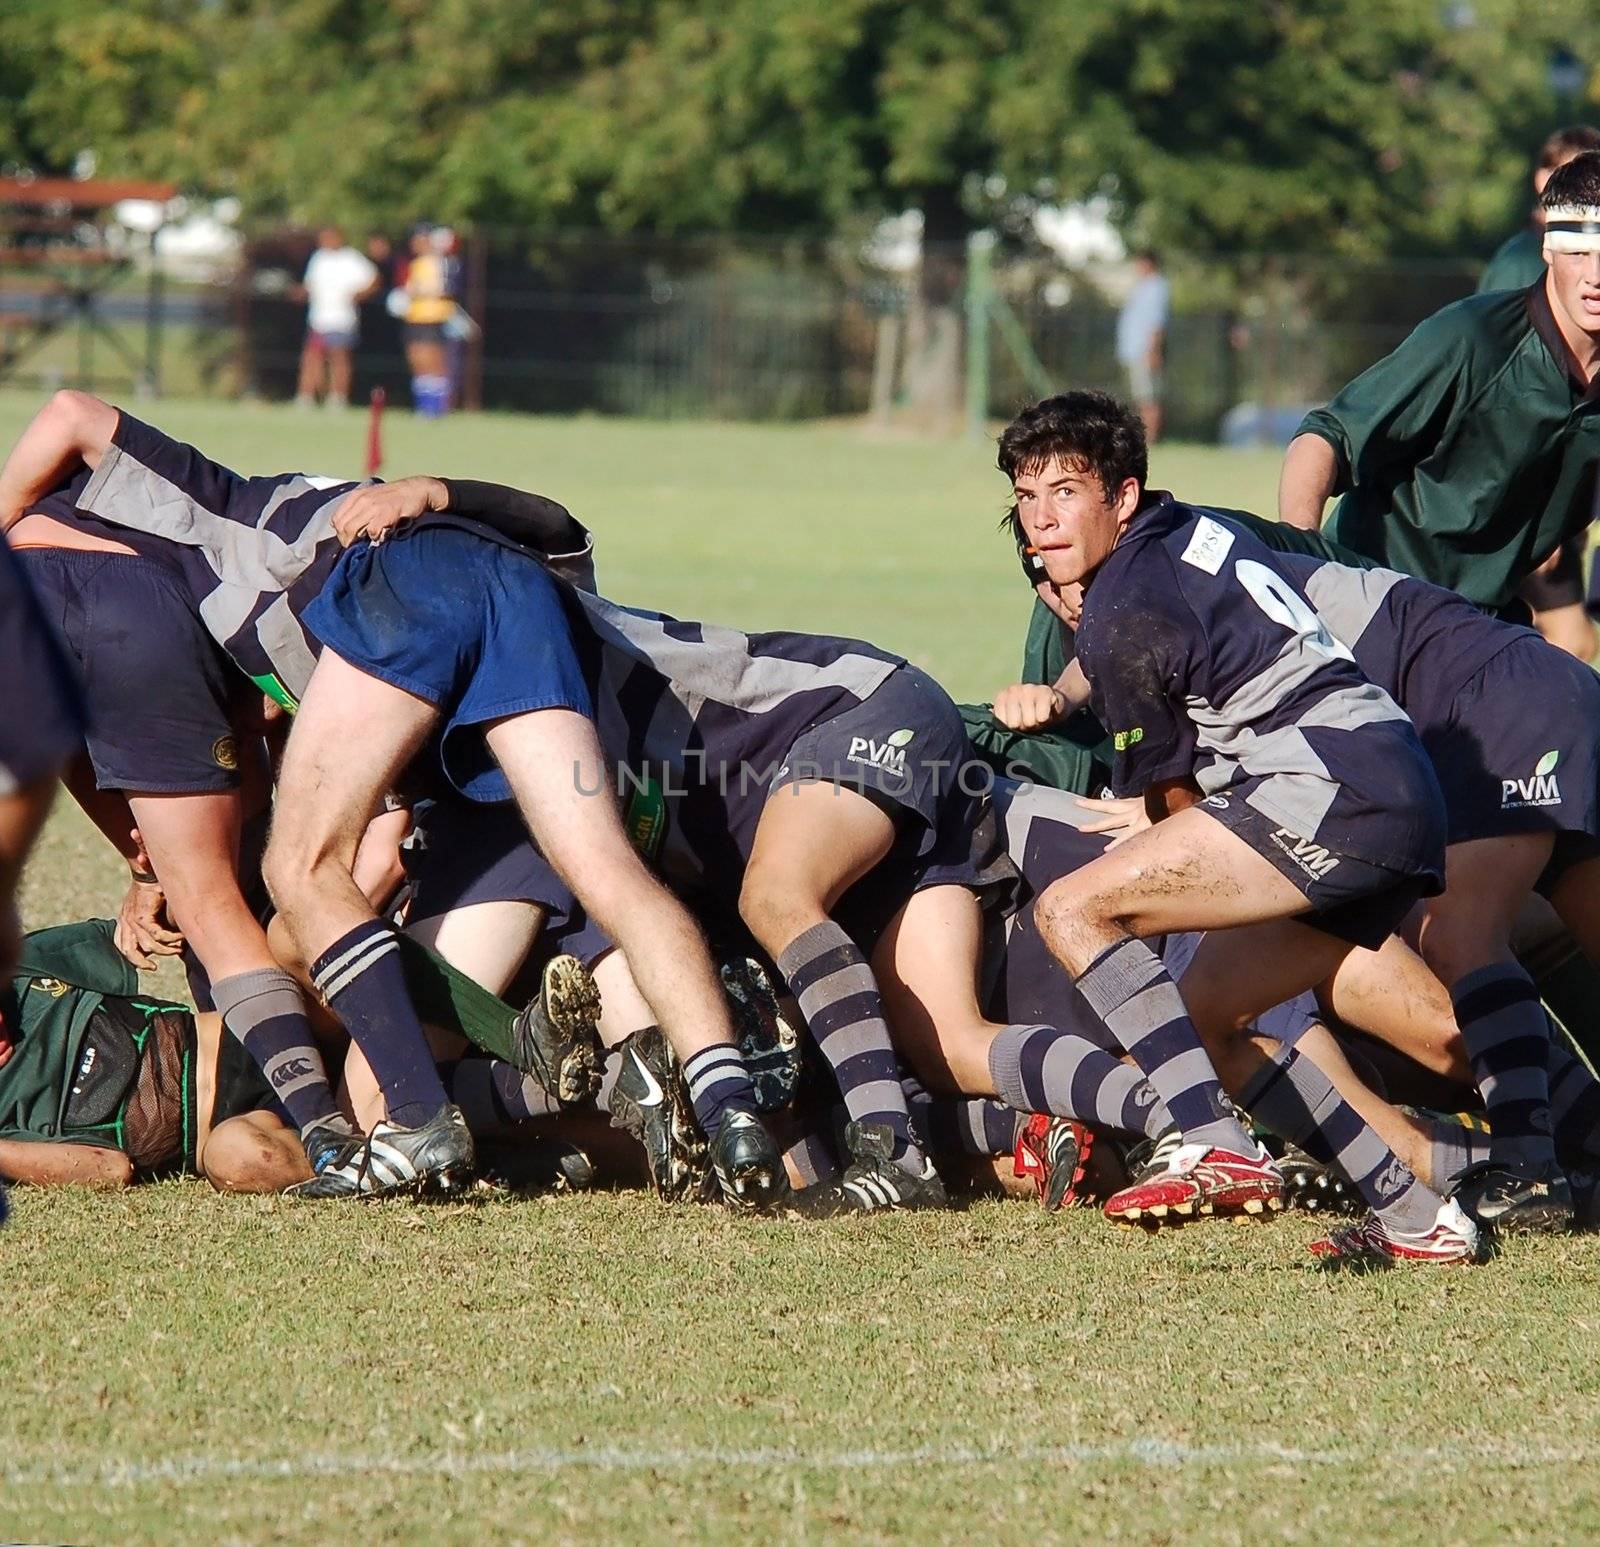 The scrumhalf to pass the ball  in a school rugby football match (Editorial)